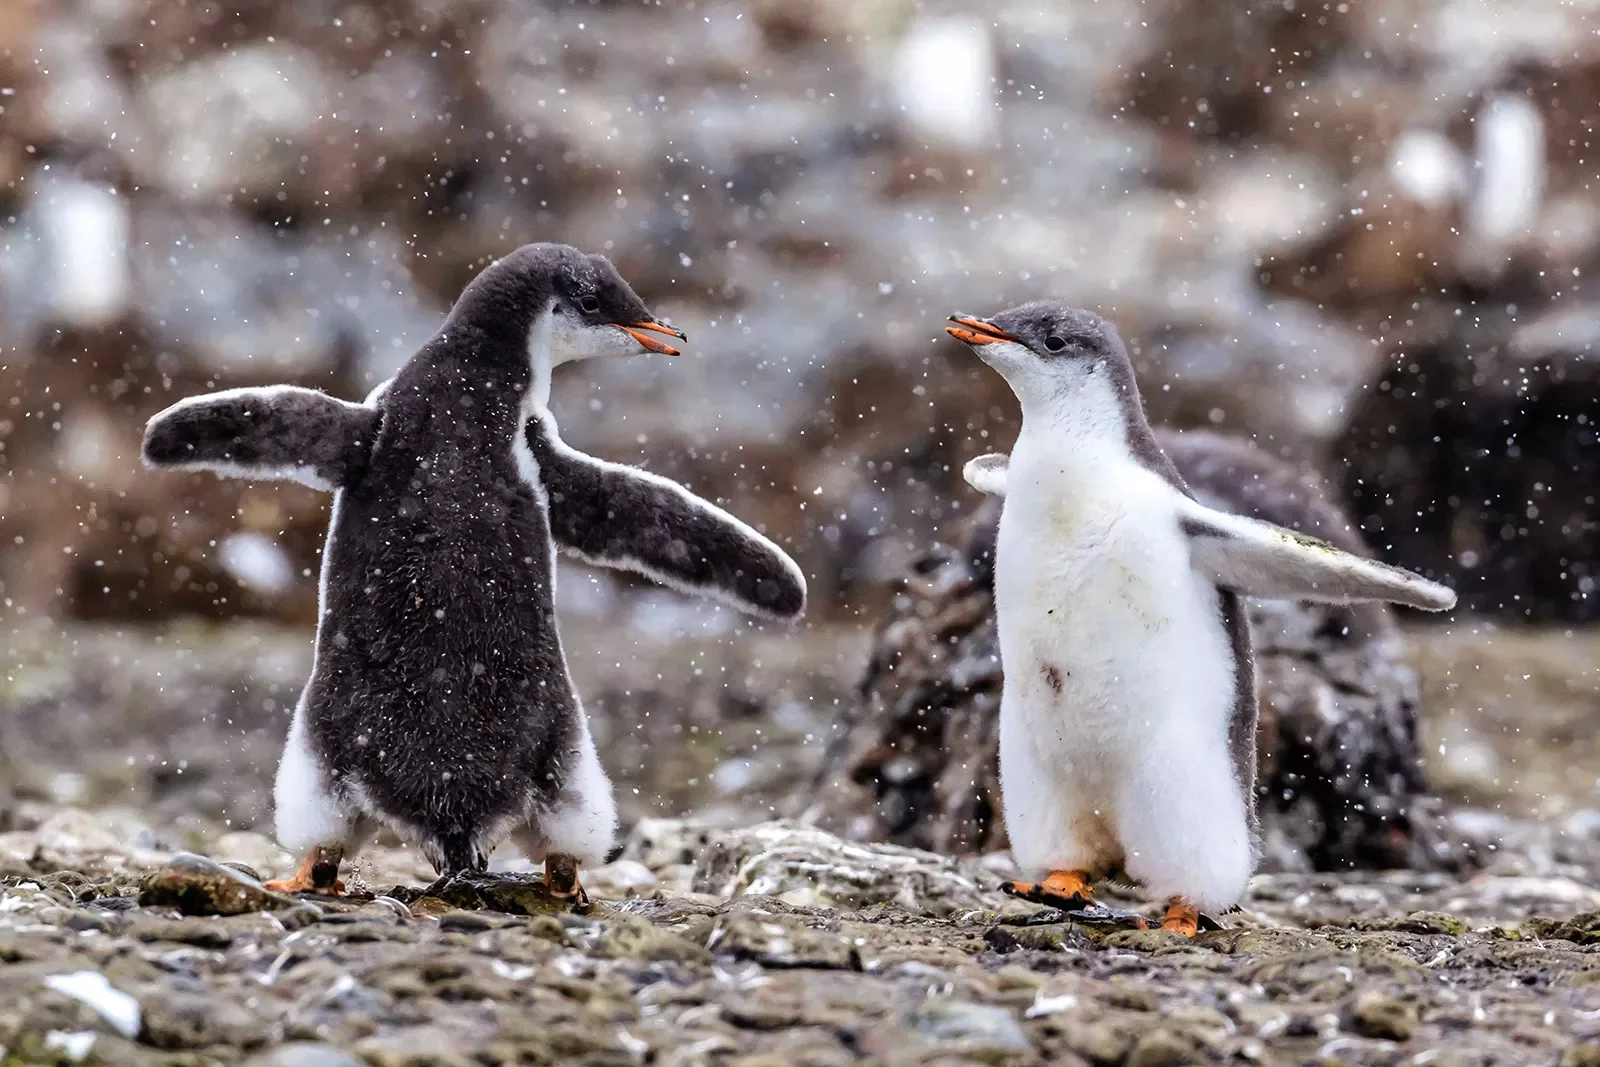 Two penguins on a rocky beach in Antarctica